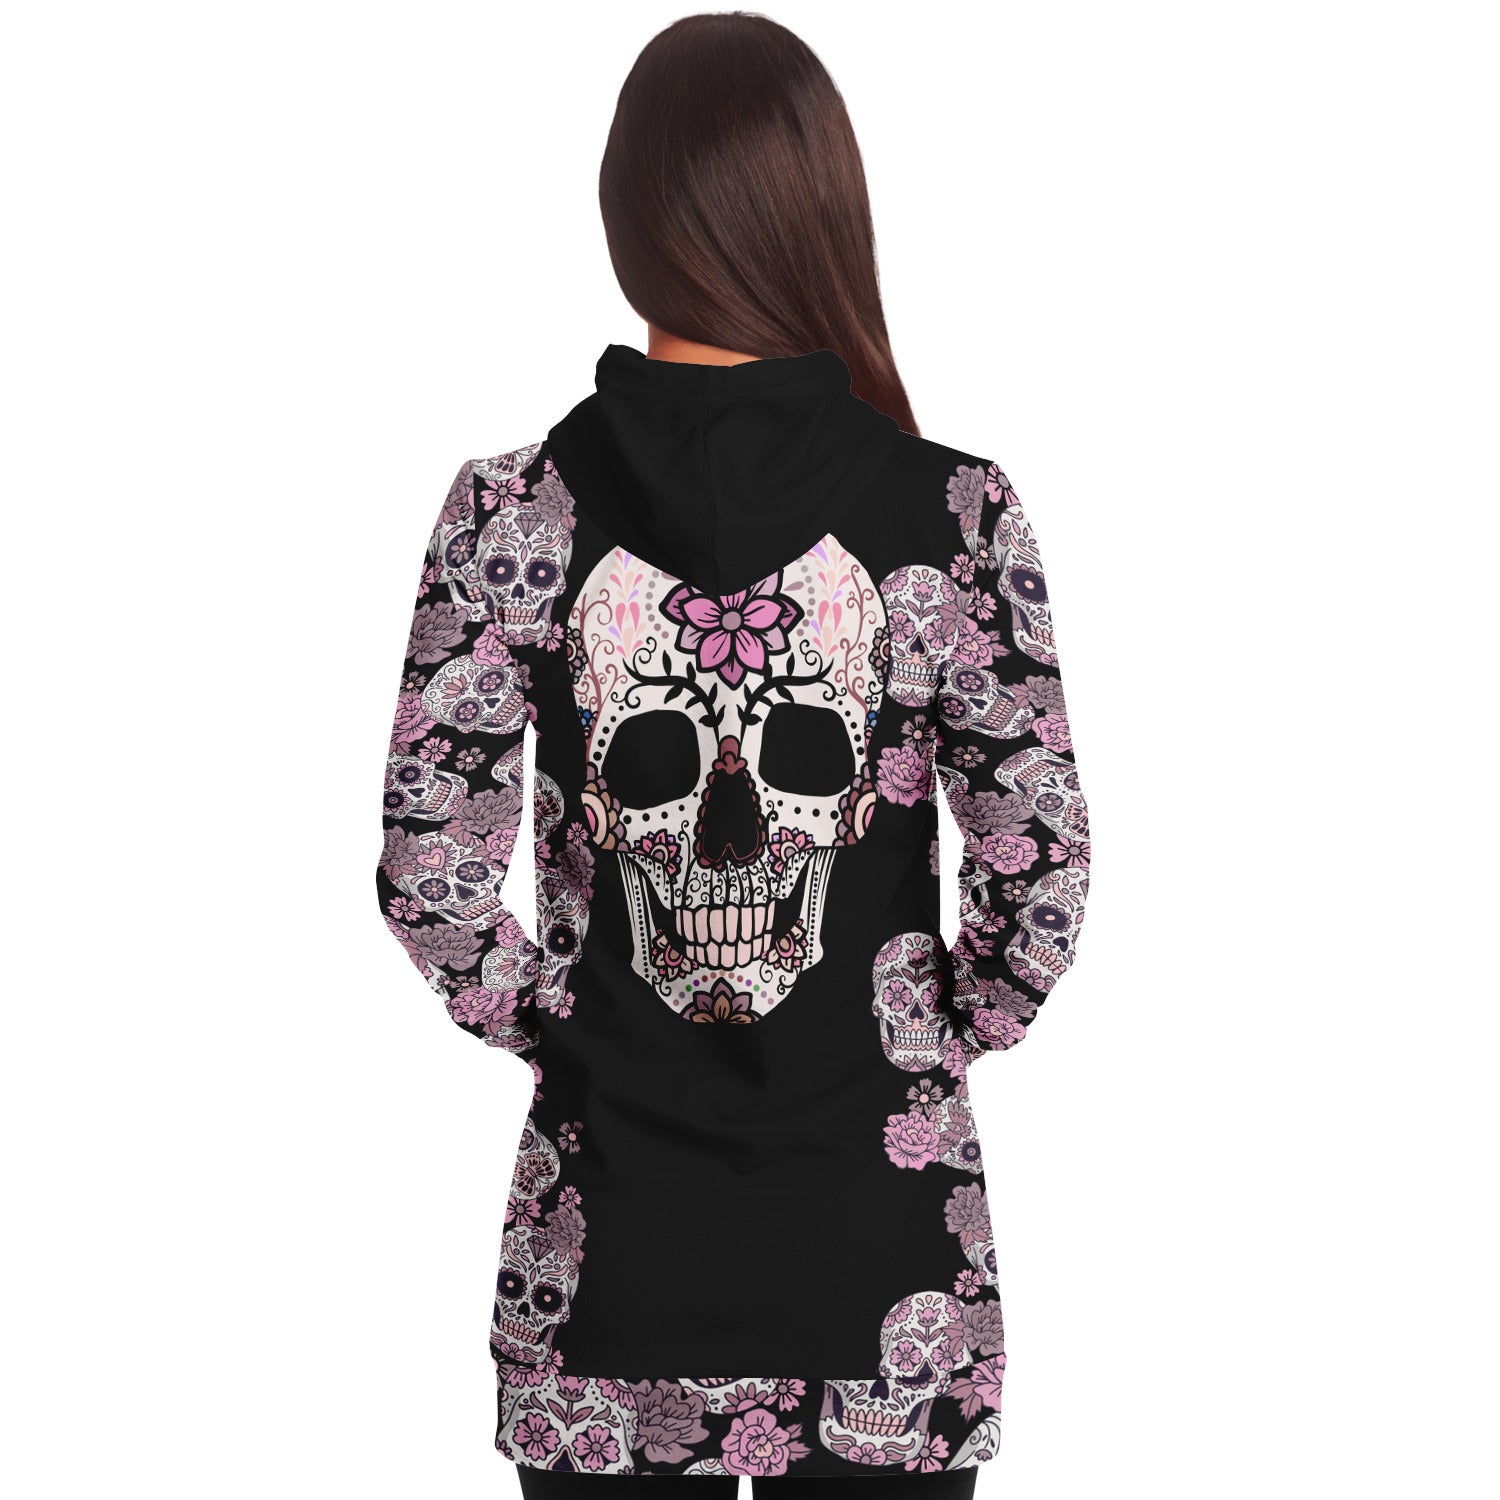 Black & Pink Day of the Dead Longline Fashion Hoodie